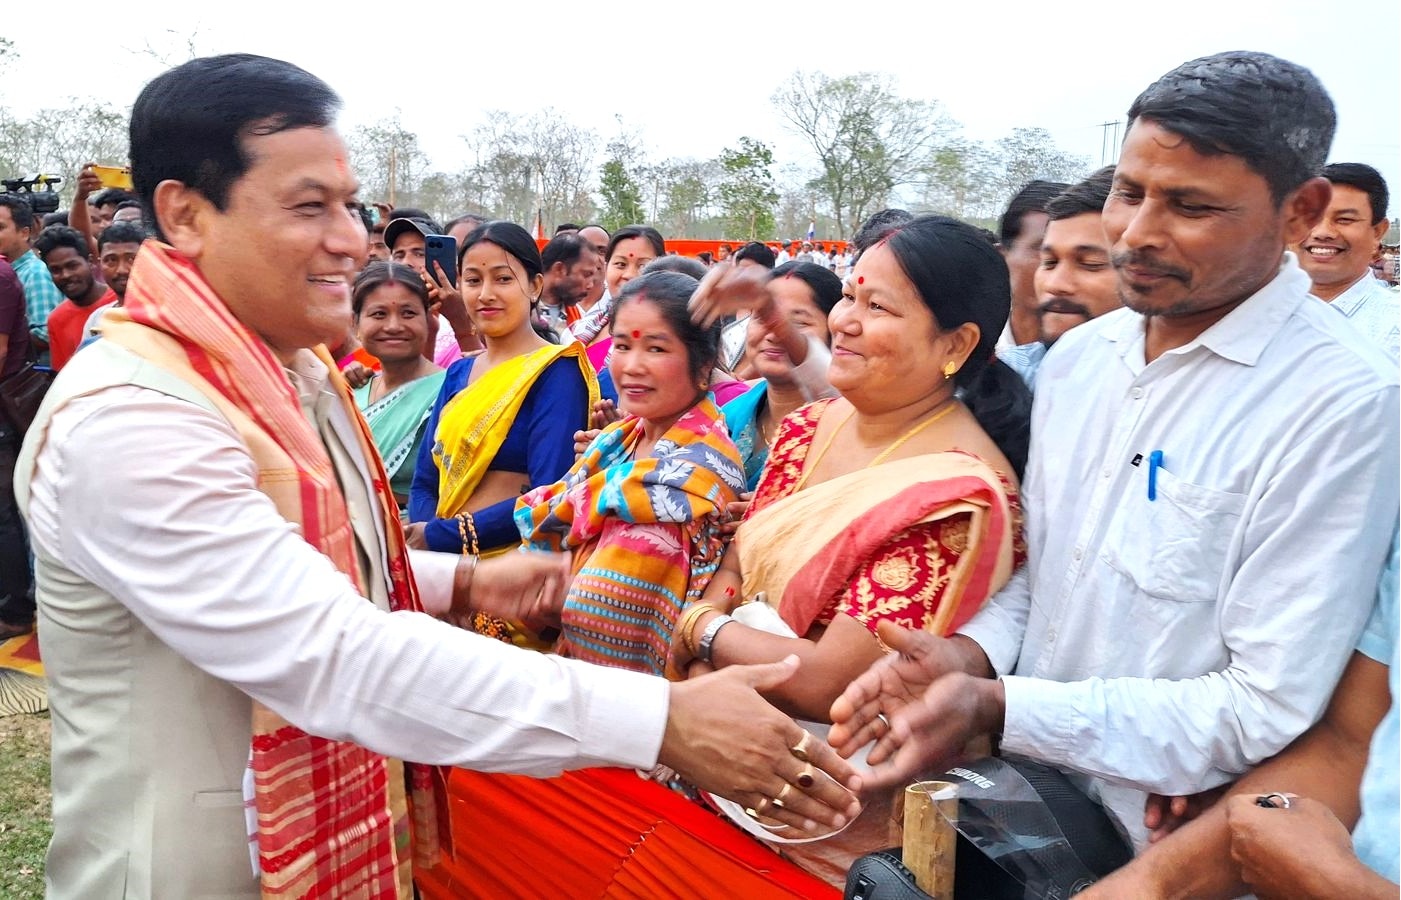 People Of Assam Will Never Forget Atrocities Faced Under Congress: Former CM Sarbananda Sonowal